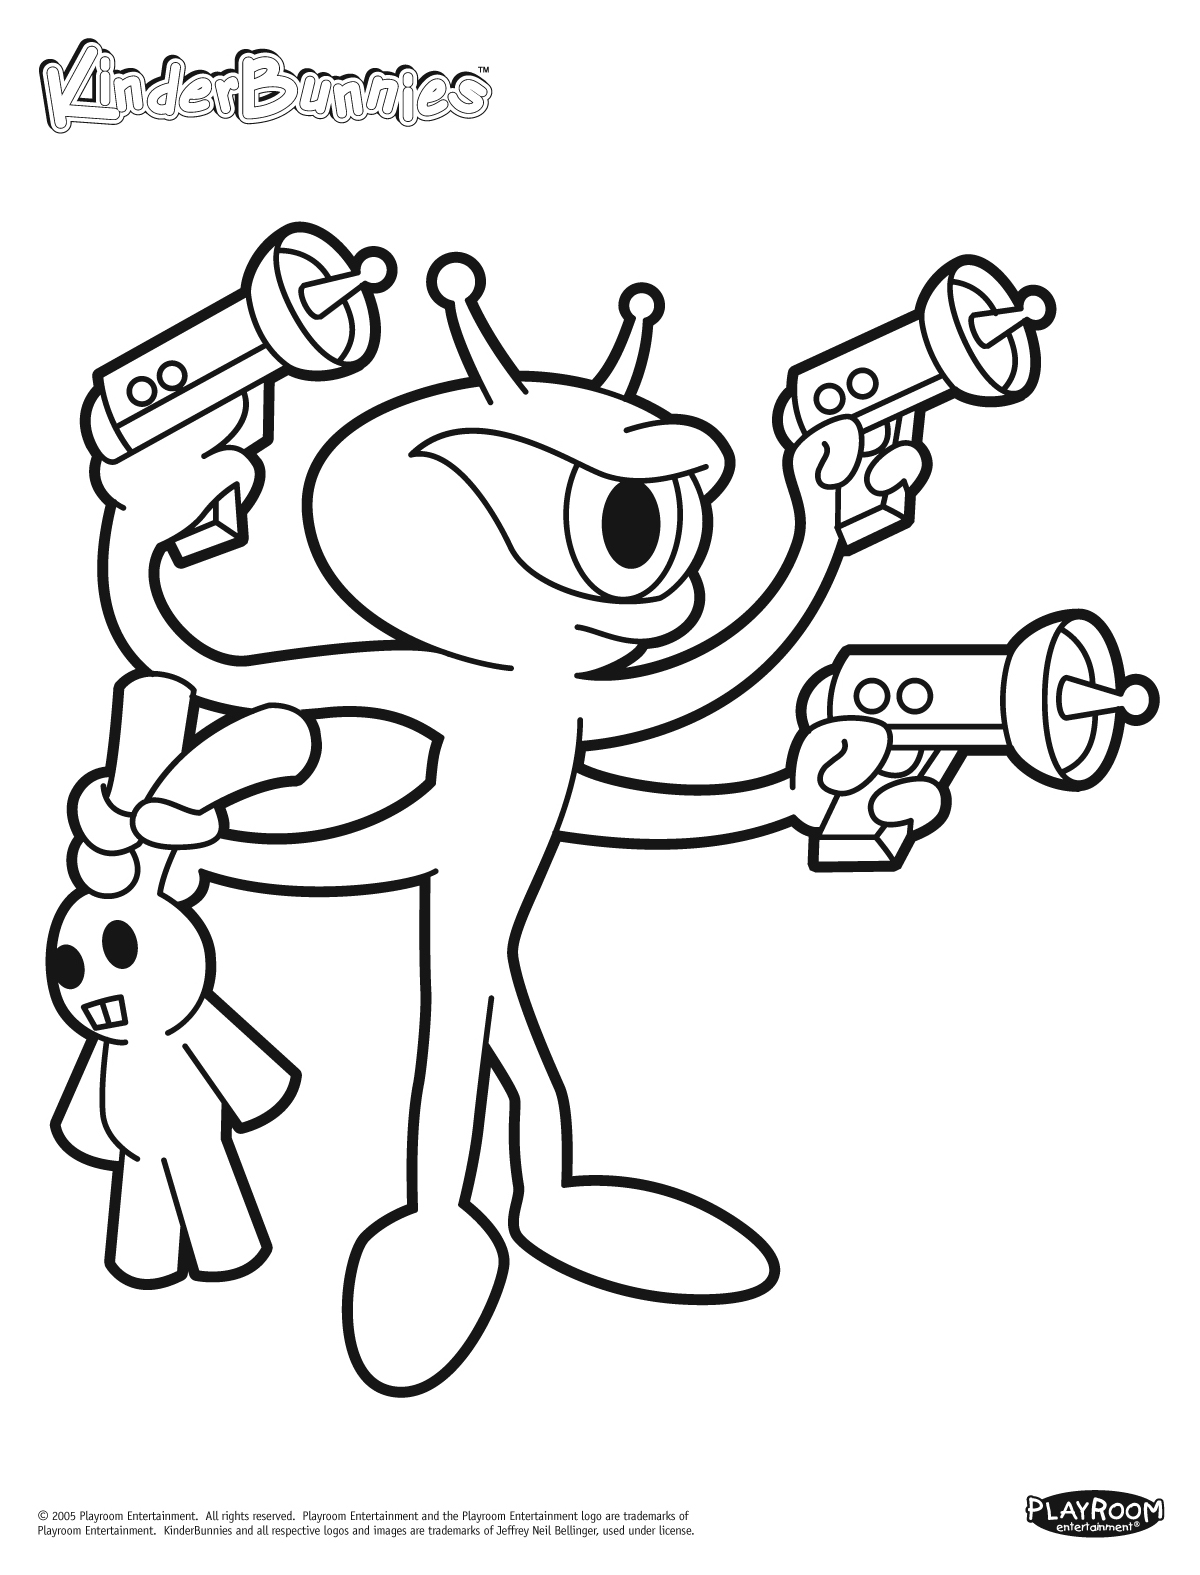 Alien Coloring Pages For Kids / Alien coloring pages to download and